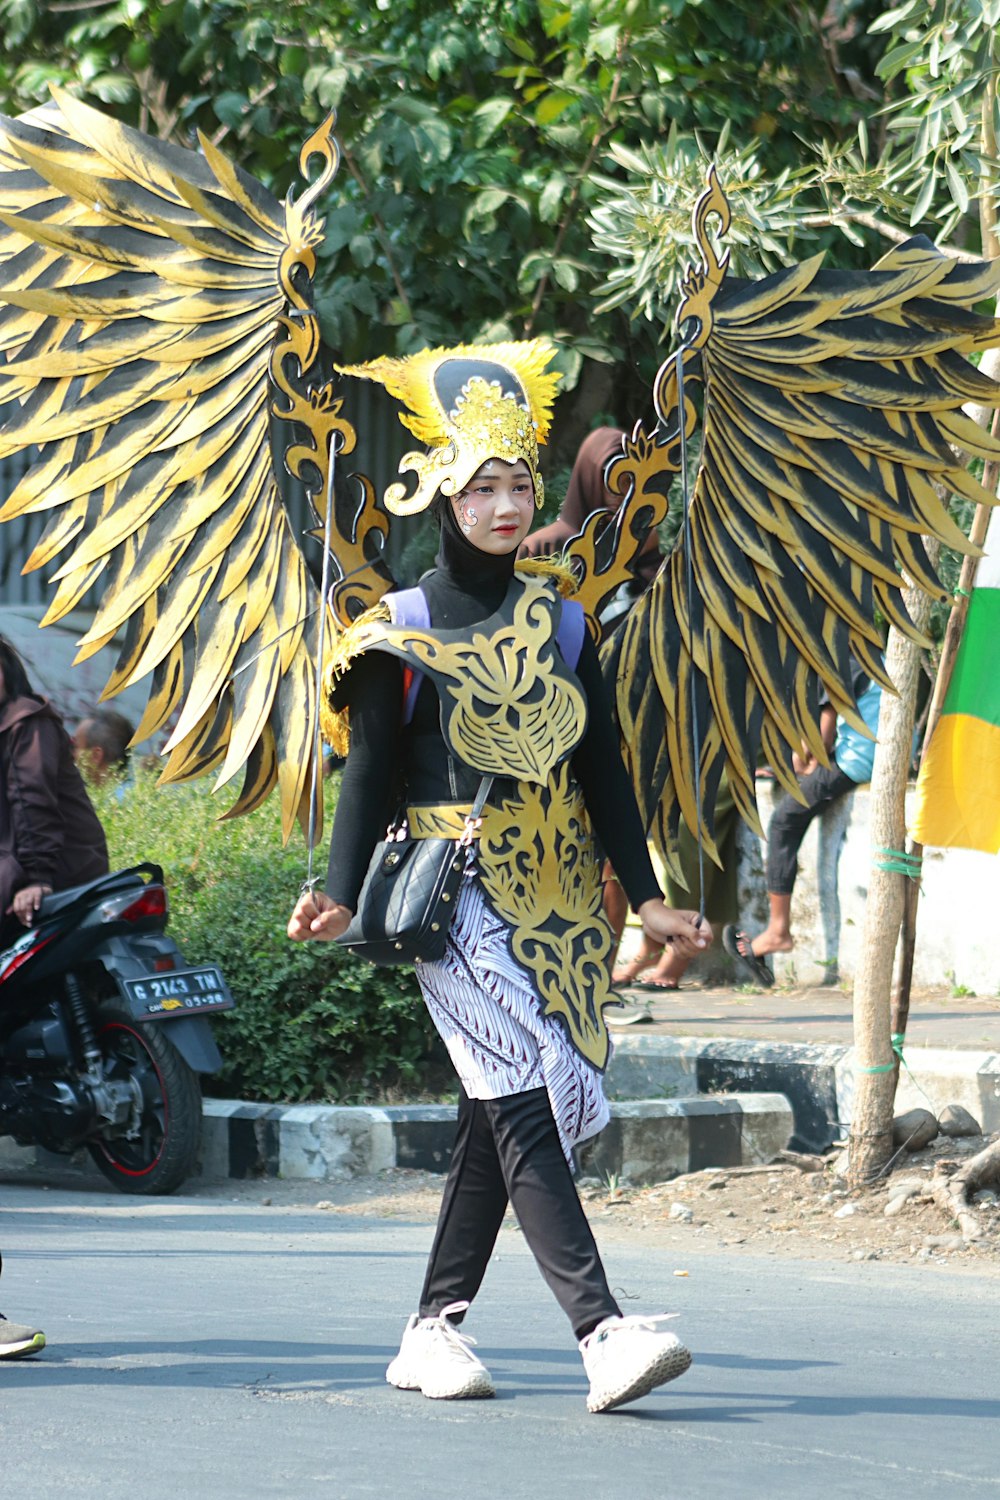 a person walking down a street with a large bird costume on